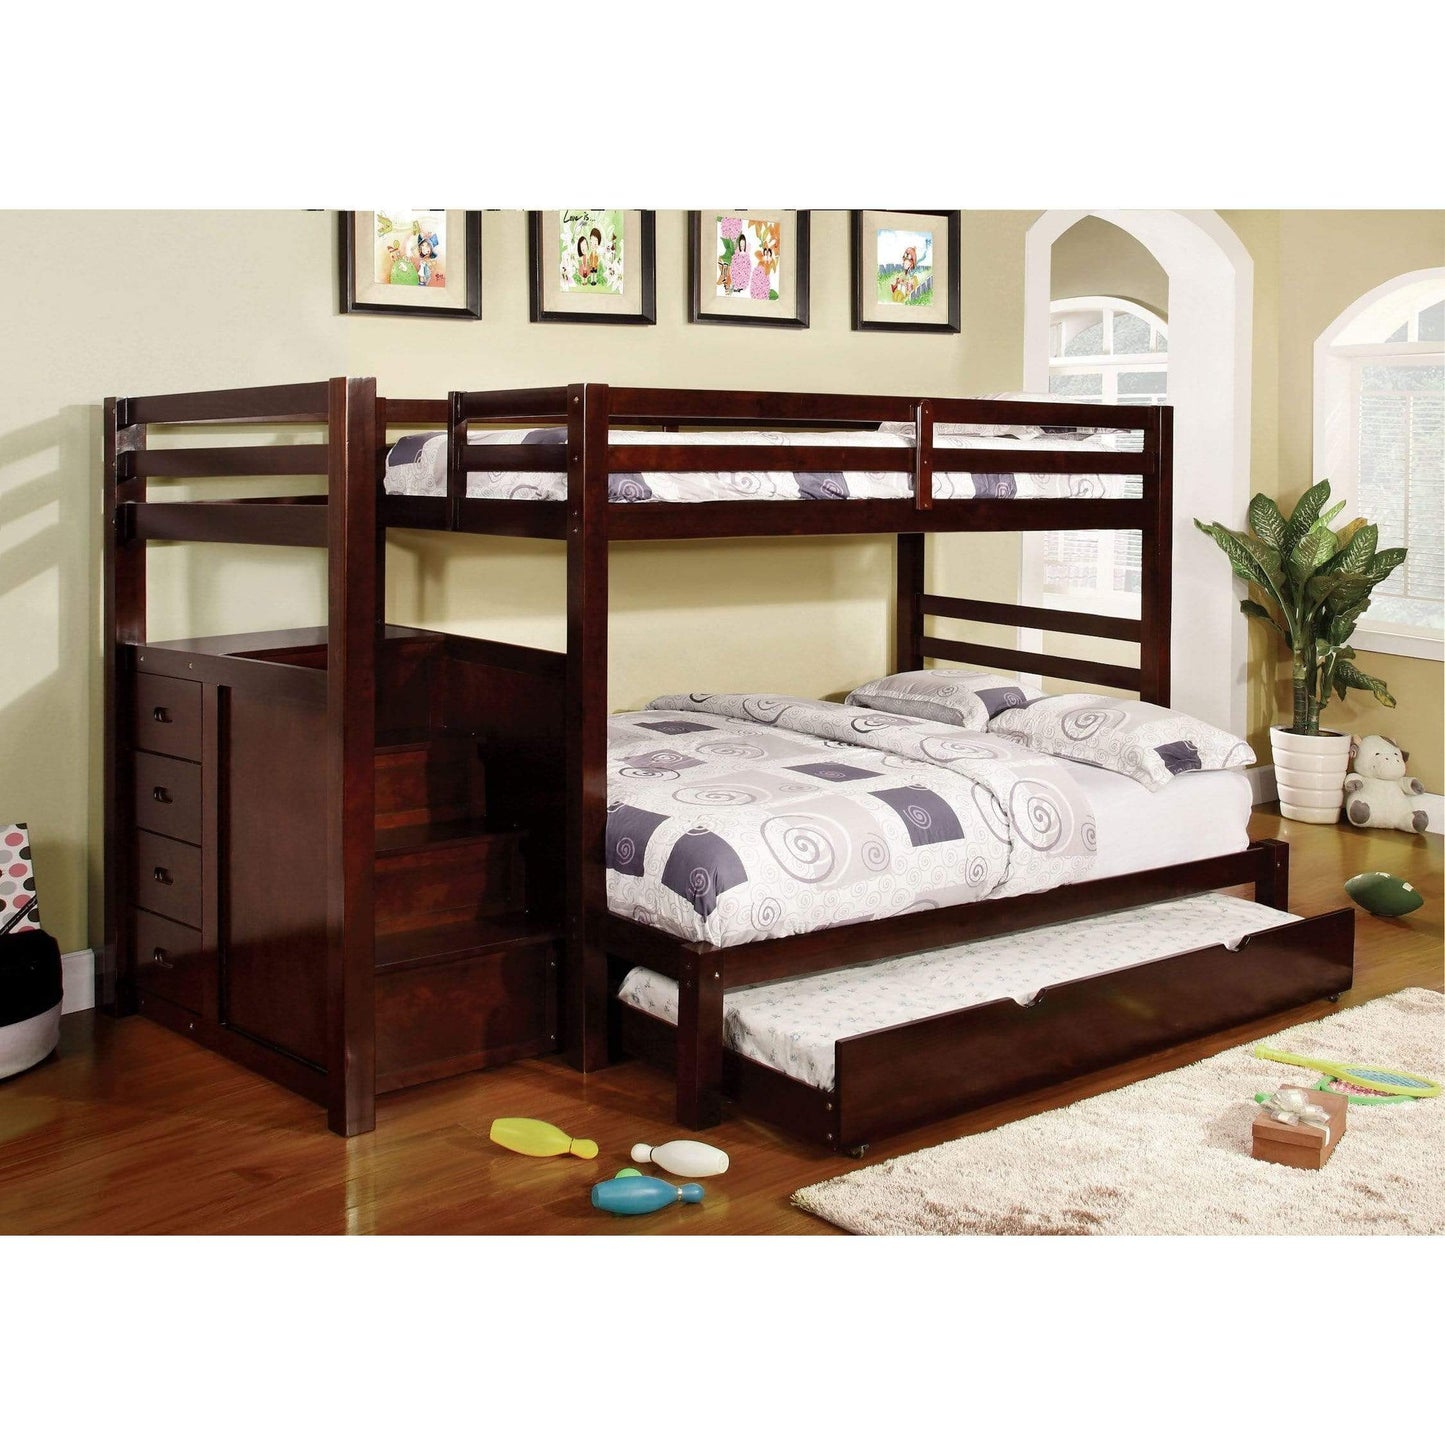 Furniture of America Bunk Bed Pine Ridge Transitional Twin/ Full Bunk Bed- Trundle not Included